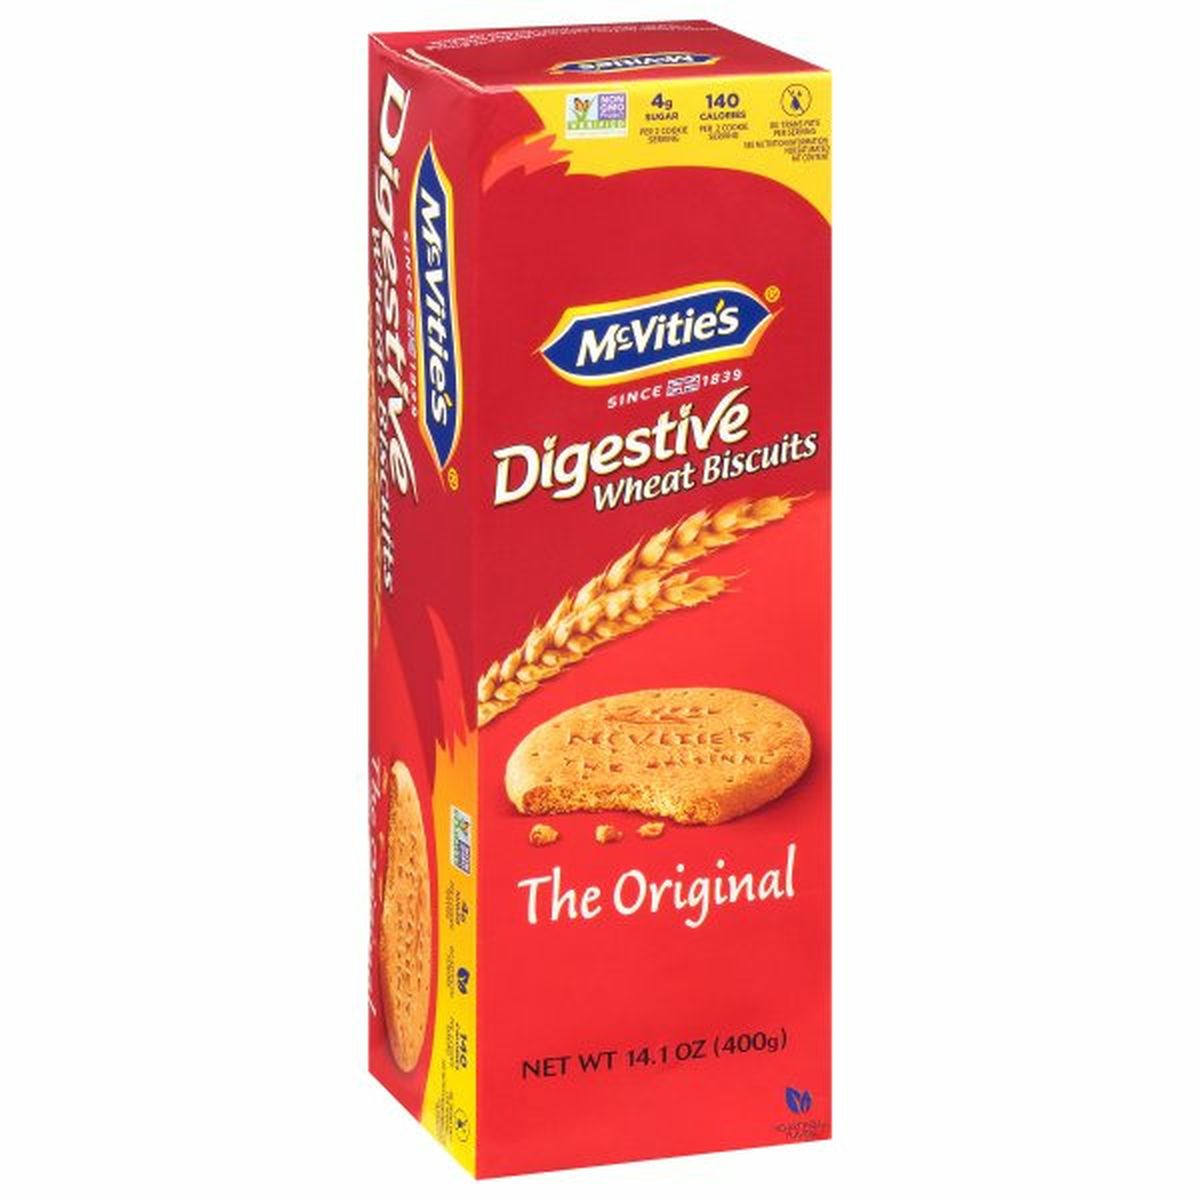 Calories in McVitie's Digestive Biscuits, Wheat, The Original